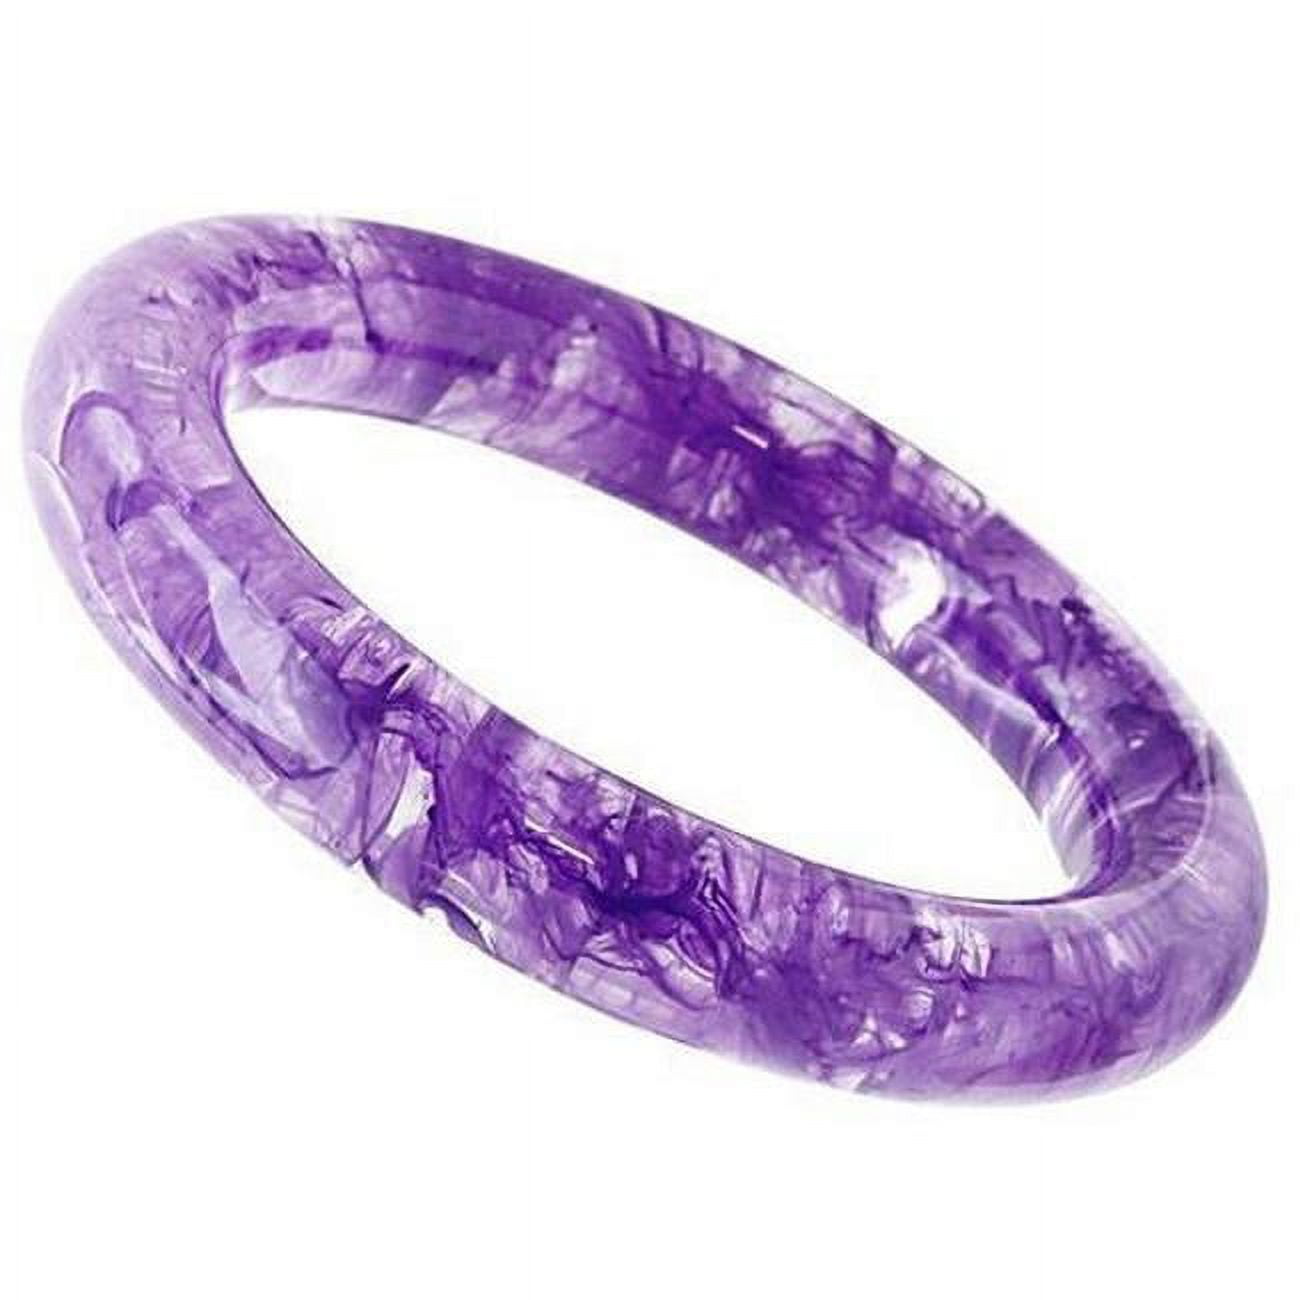 Picture of Alamode VL054-7.25 7.25 in. Resin Bangle with No Stone, Amethyst